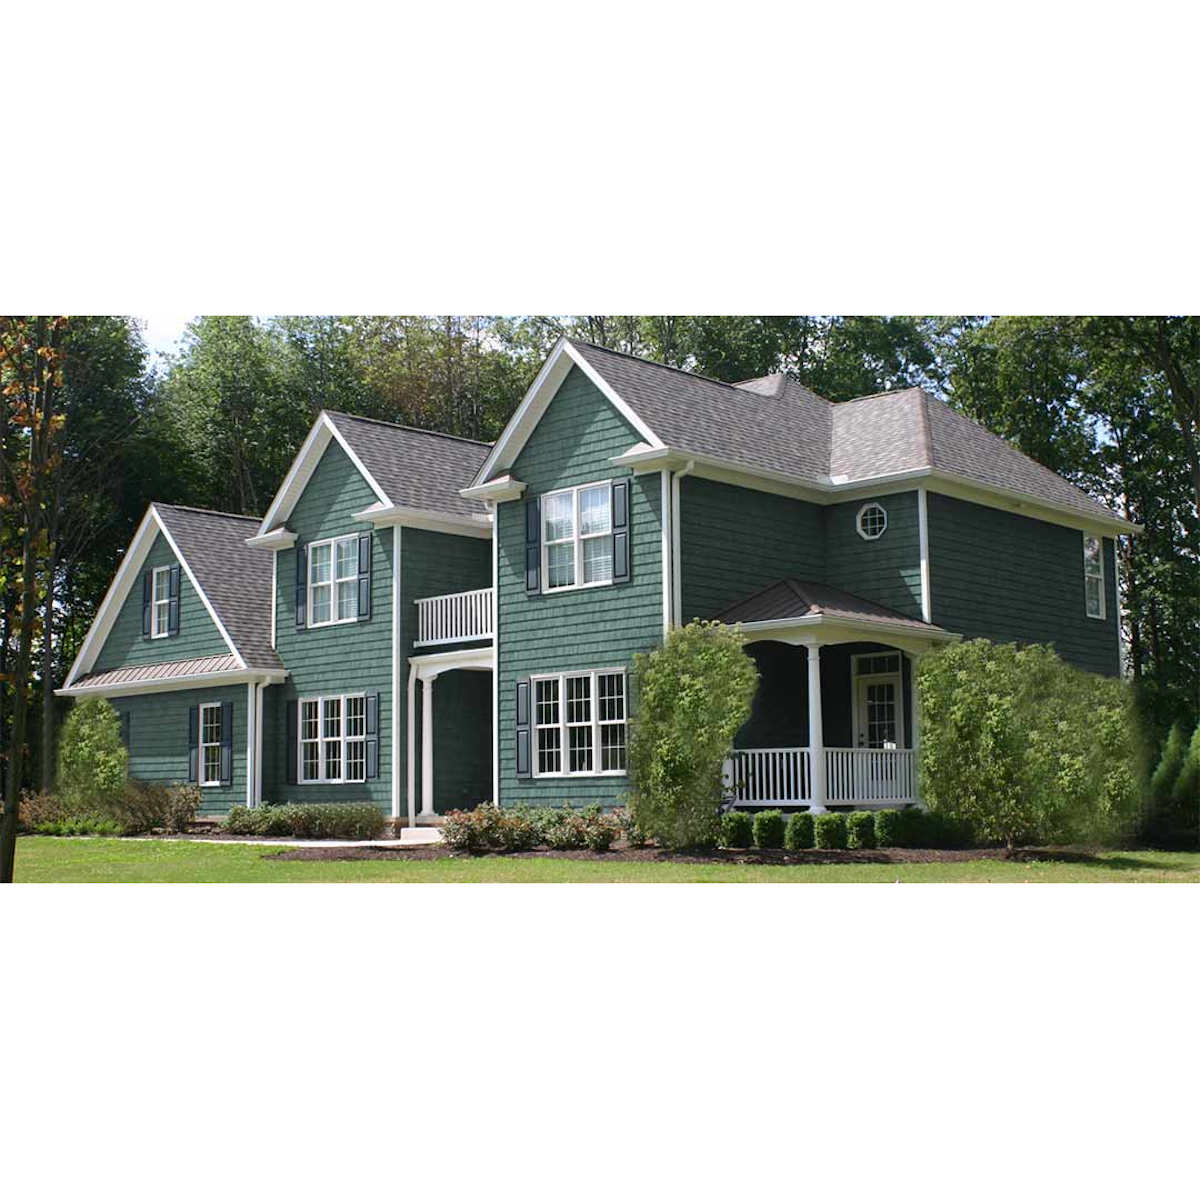 Ivy Green Siding On a House